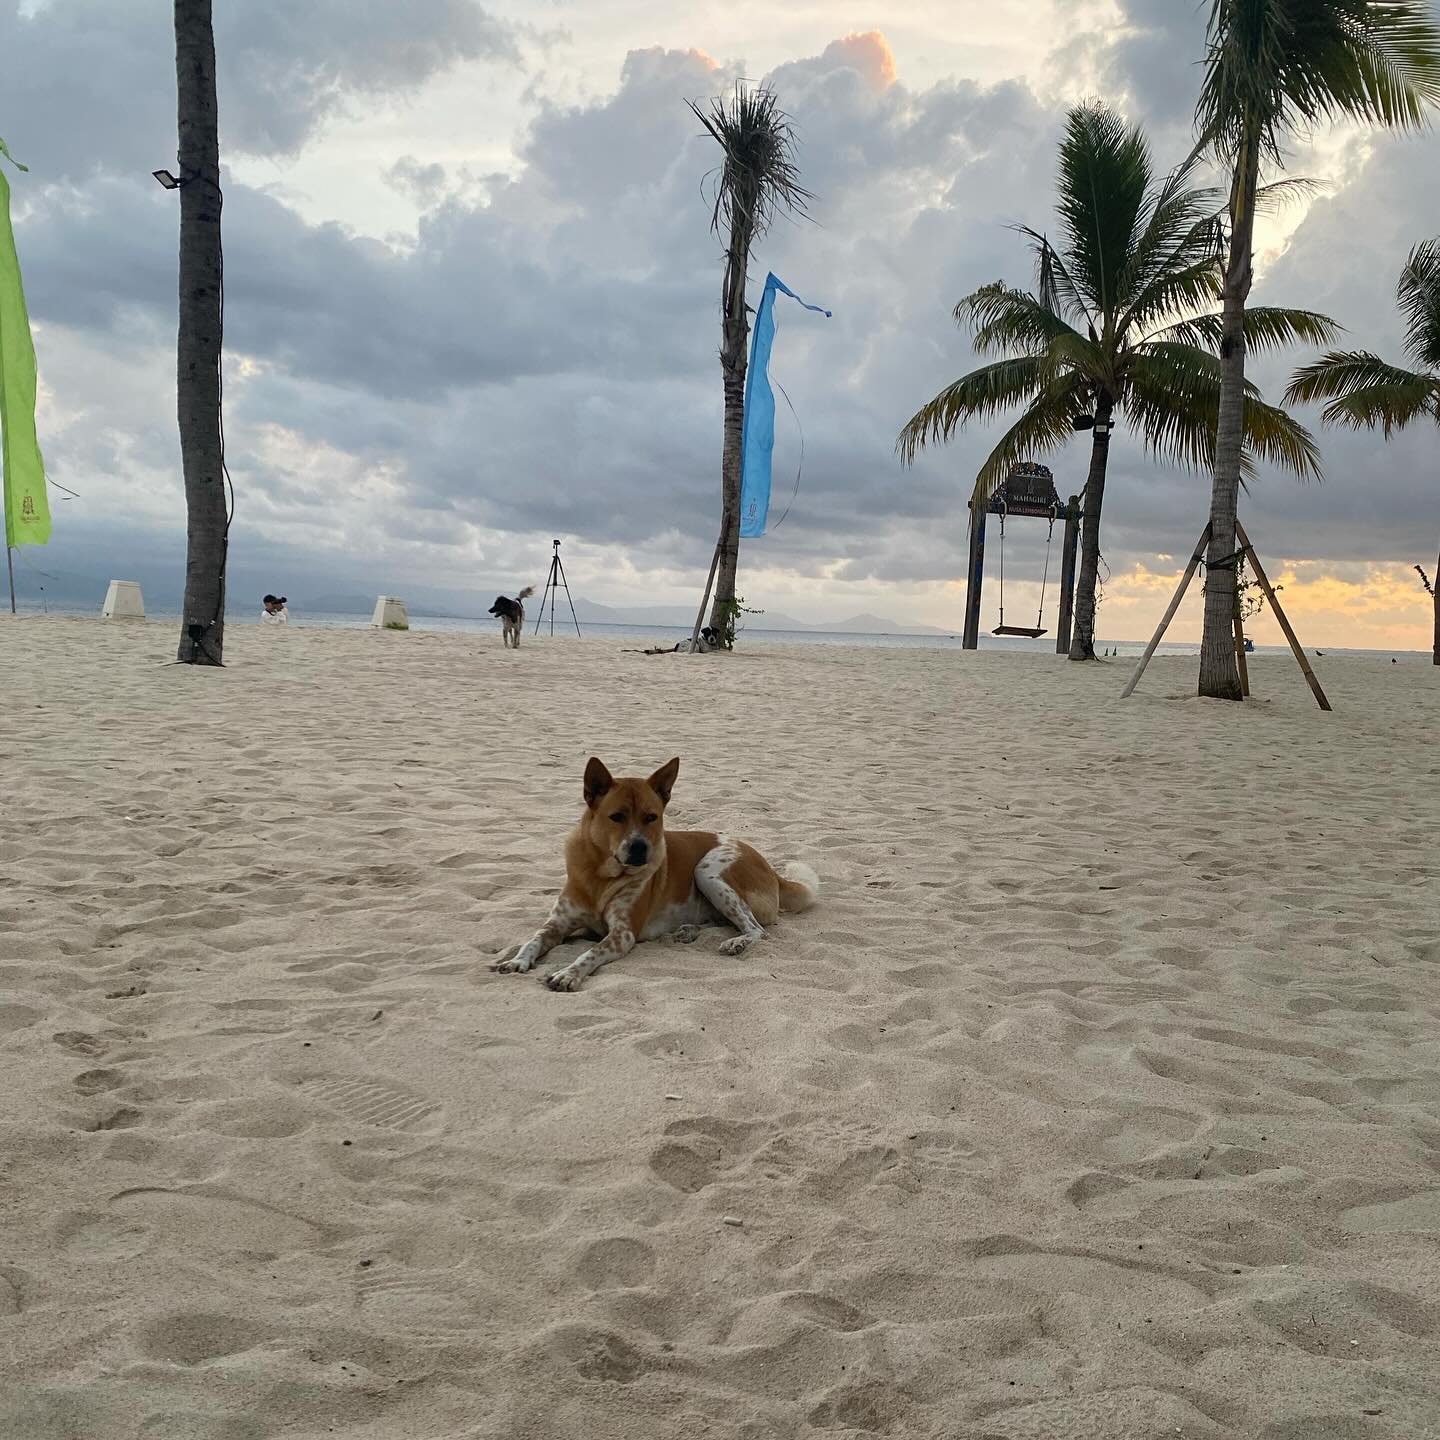 This mornings sunrise gang - 3 followed me back into our resort, certainly not shy! 
@nusalembonganbeach
.
.
#sunrisedogs #beachdogs #lovedogs #dogs #cuties #balidogs #islandogs #welovedogs #rescue #adopt #love #educate #mywalkingdogs